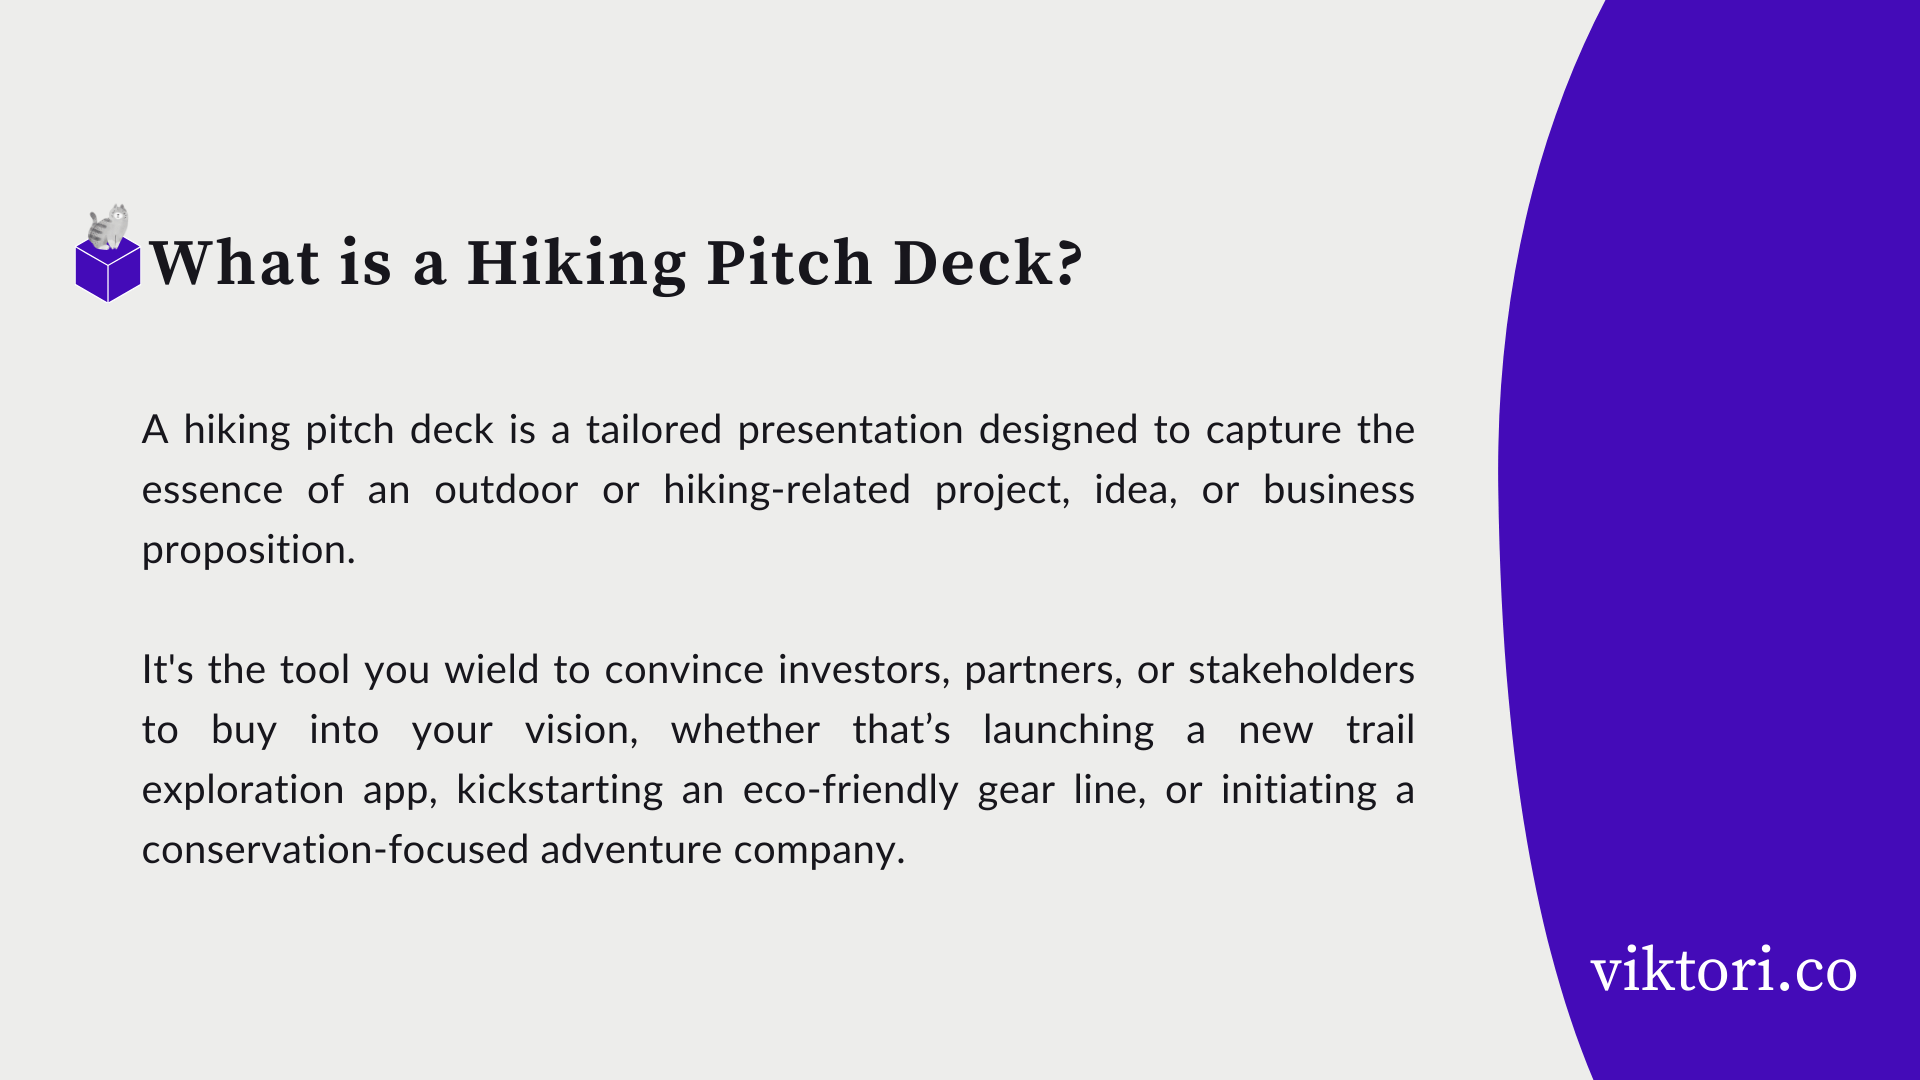 Hiking Pitch Deck Definition